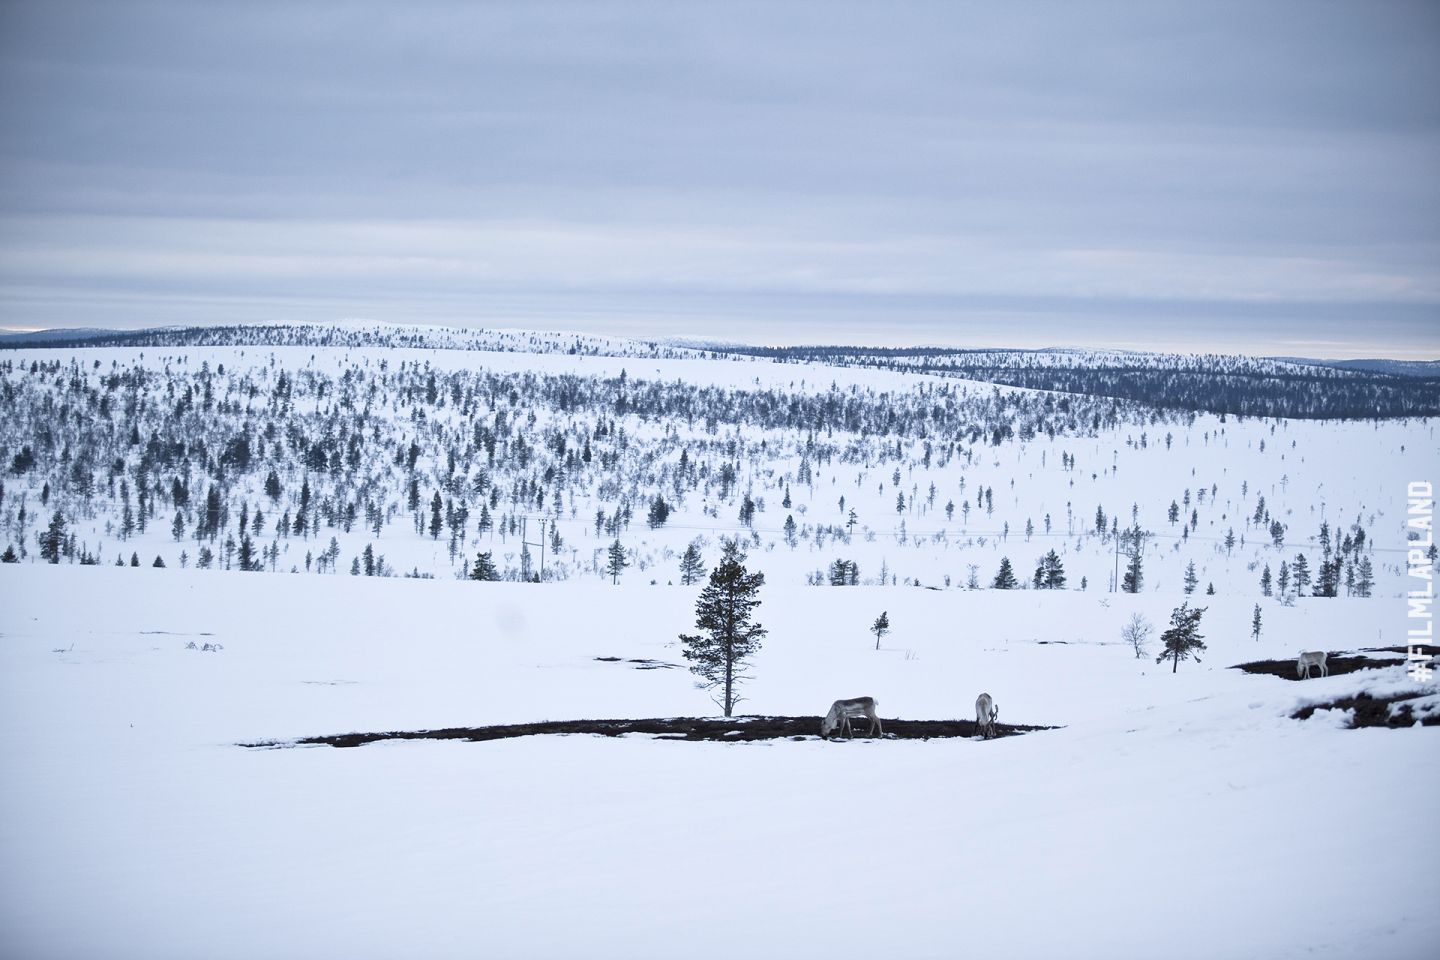 Reindeer eating in an oasis of green among the white snowy field in Inari, Finland